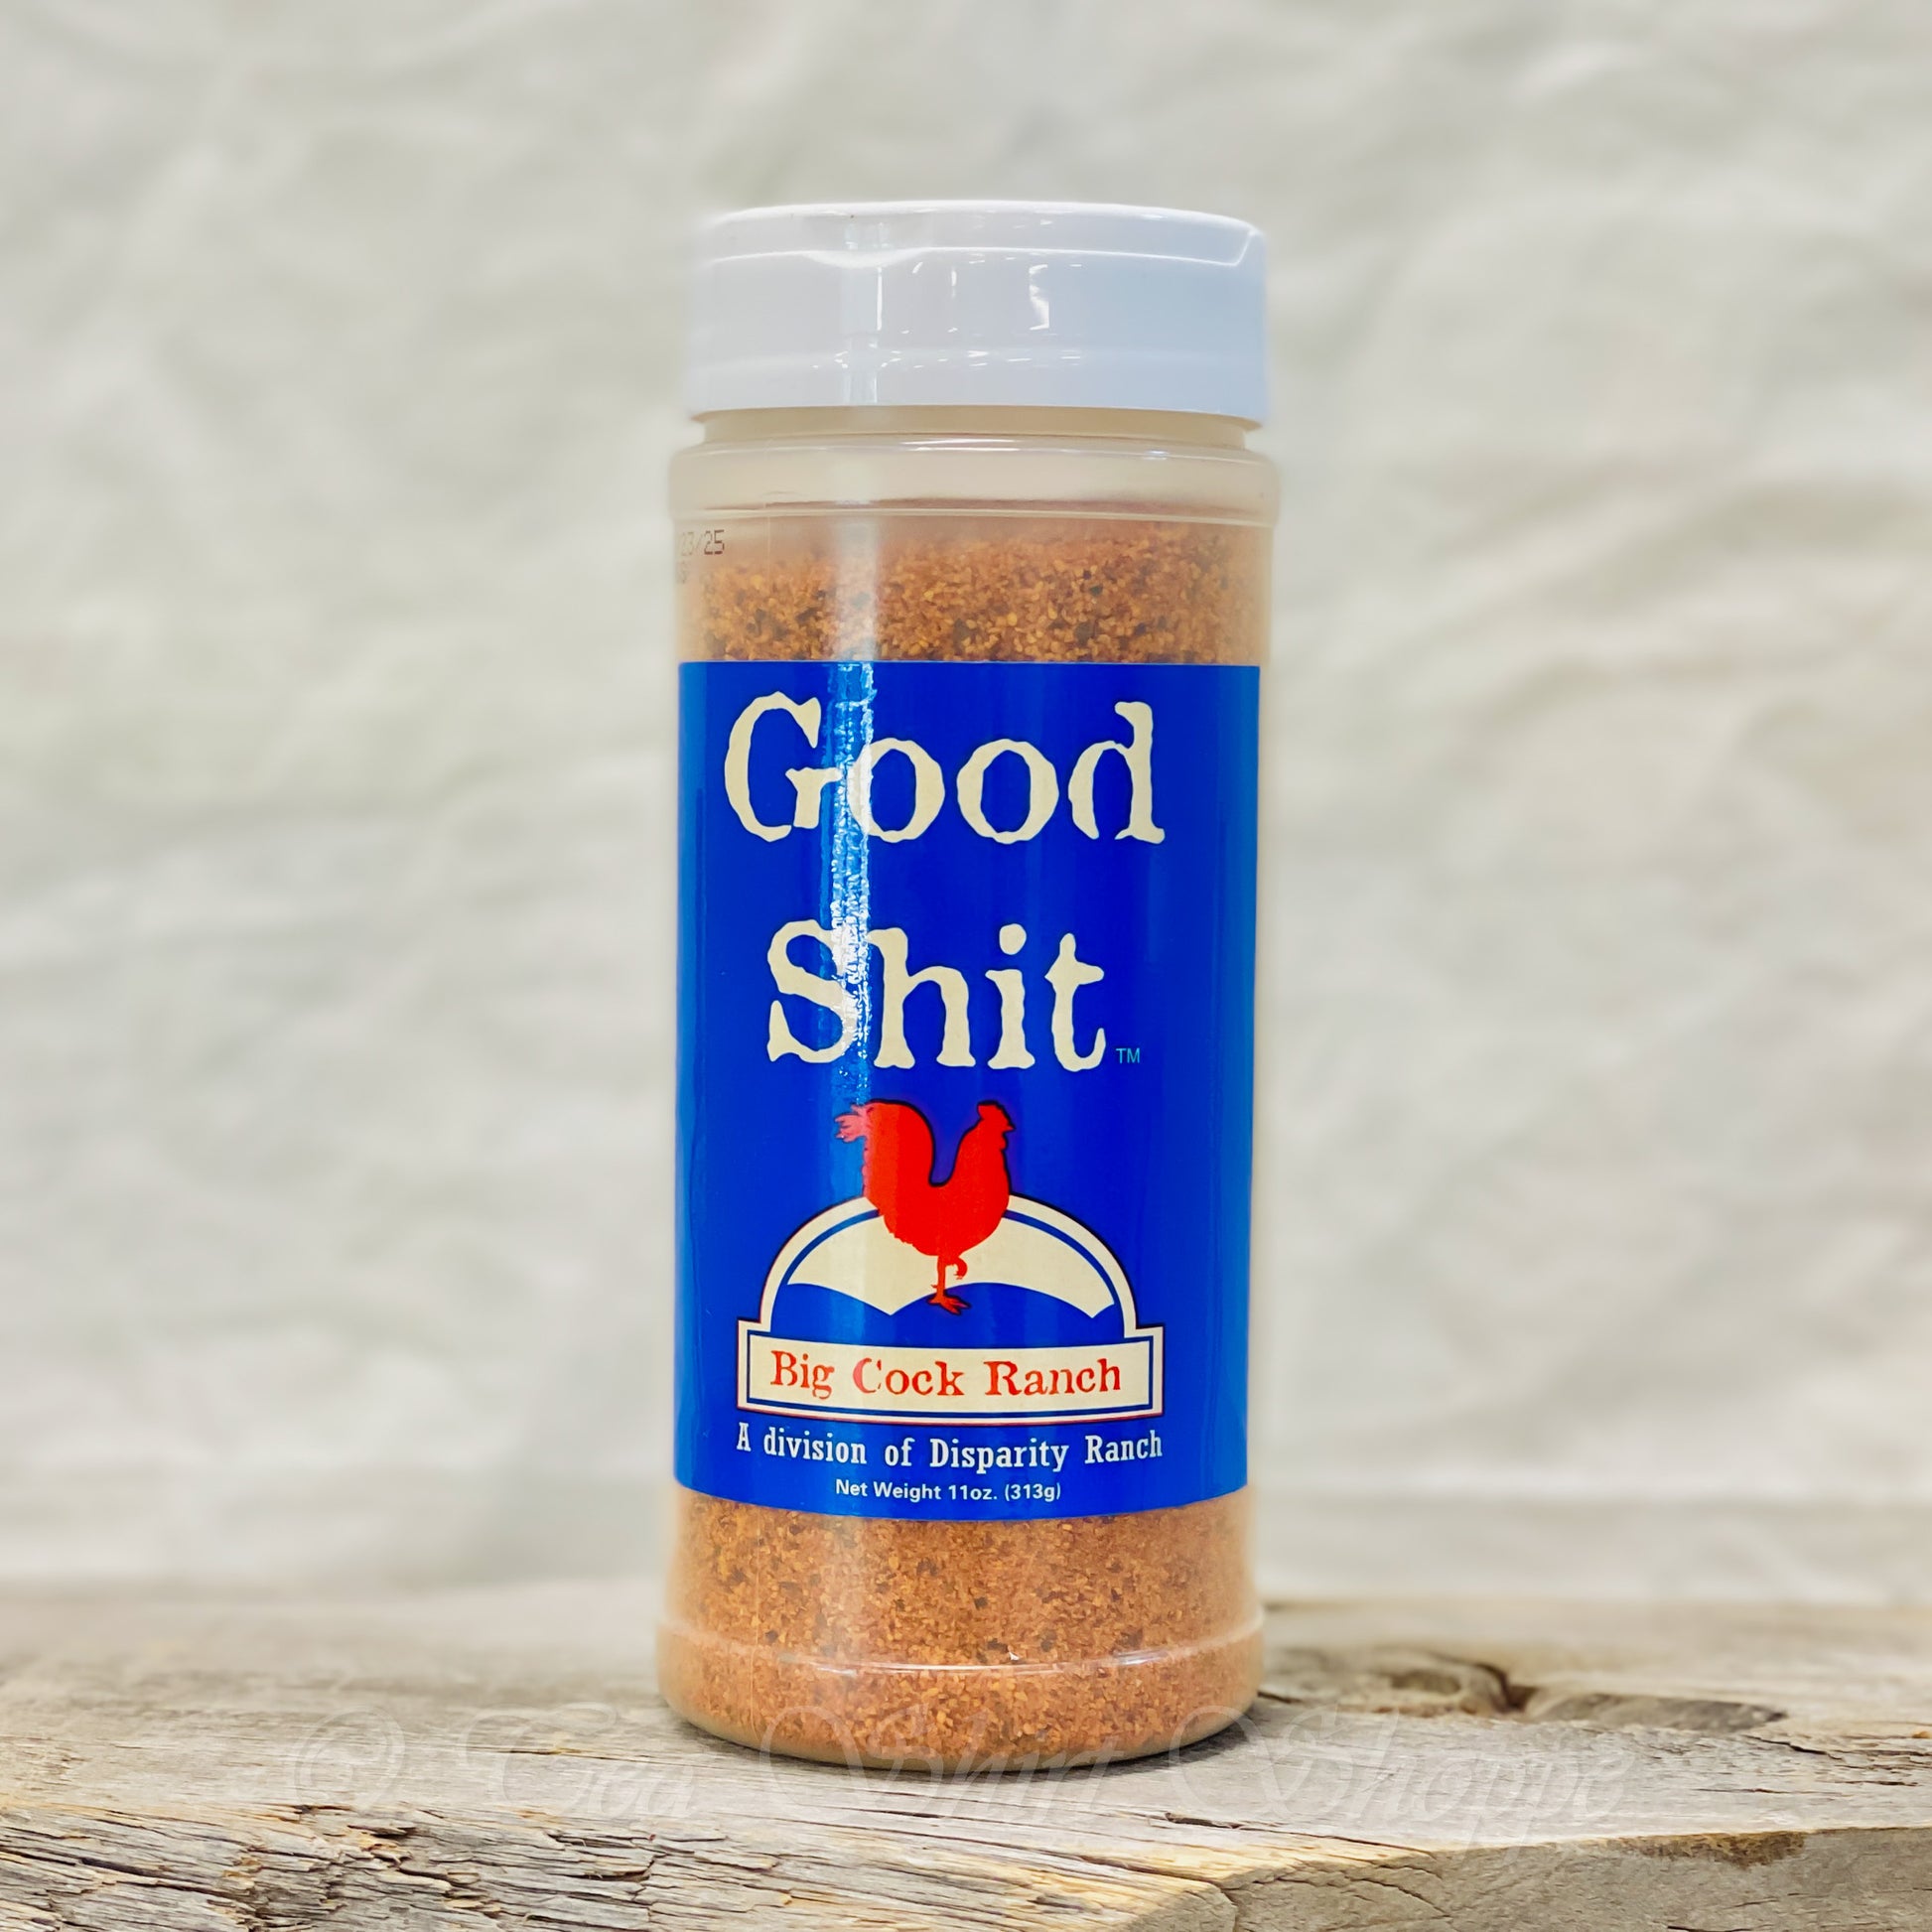  Good Shit will add just enough sweetness to leave your taste buds dancing. Try it on Teriyaki, popcorn (for that sweet and salty taste), ribs, chicken, Shit, put it on everything. But be forewarned, Good Shit is habit forming!